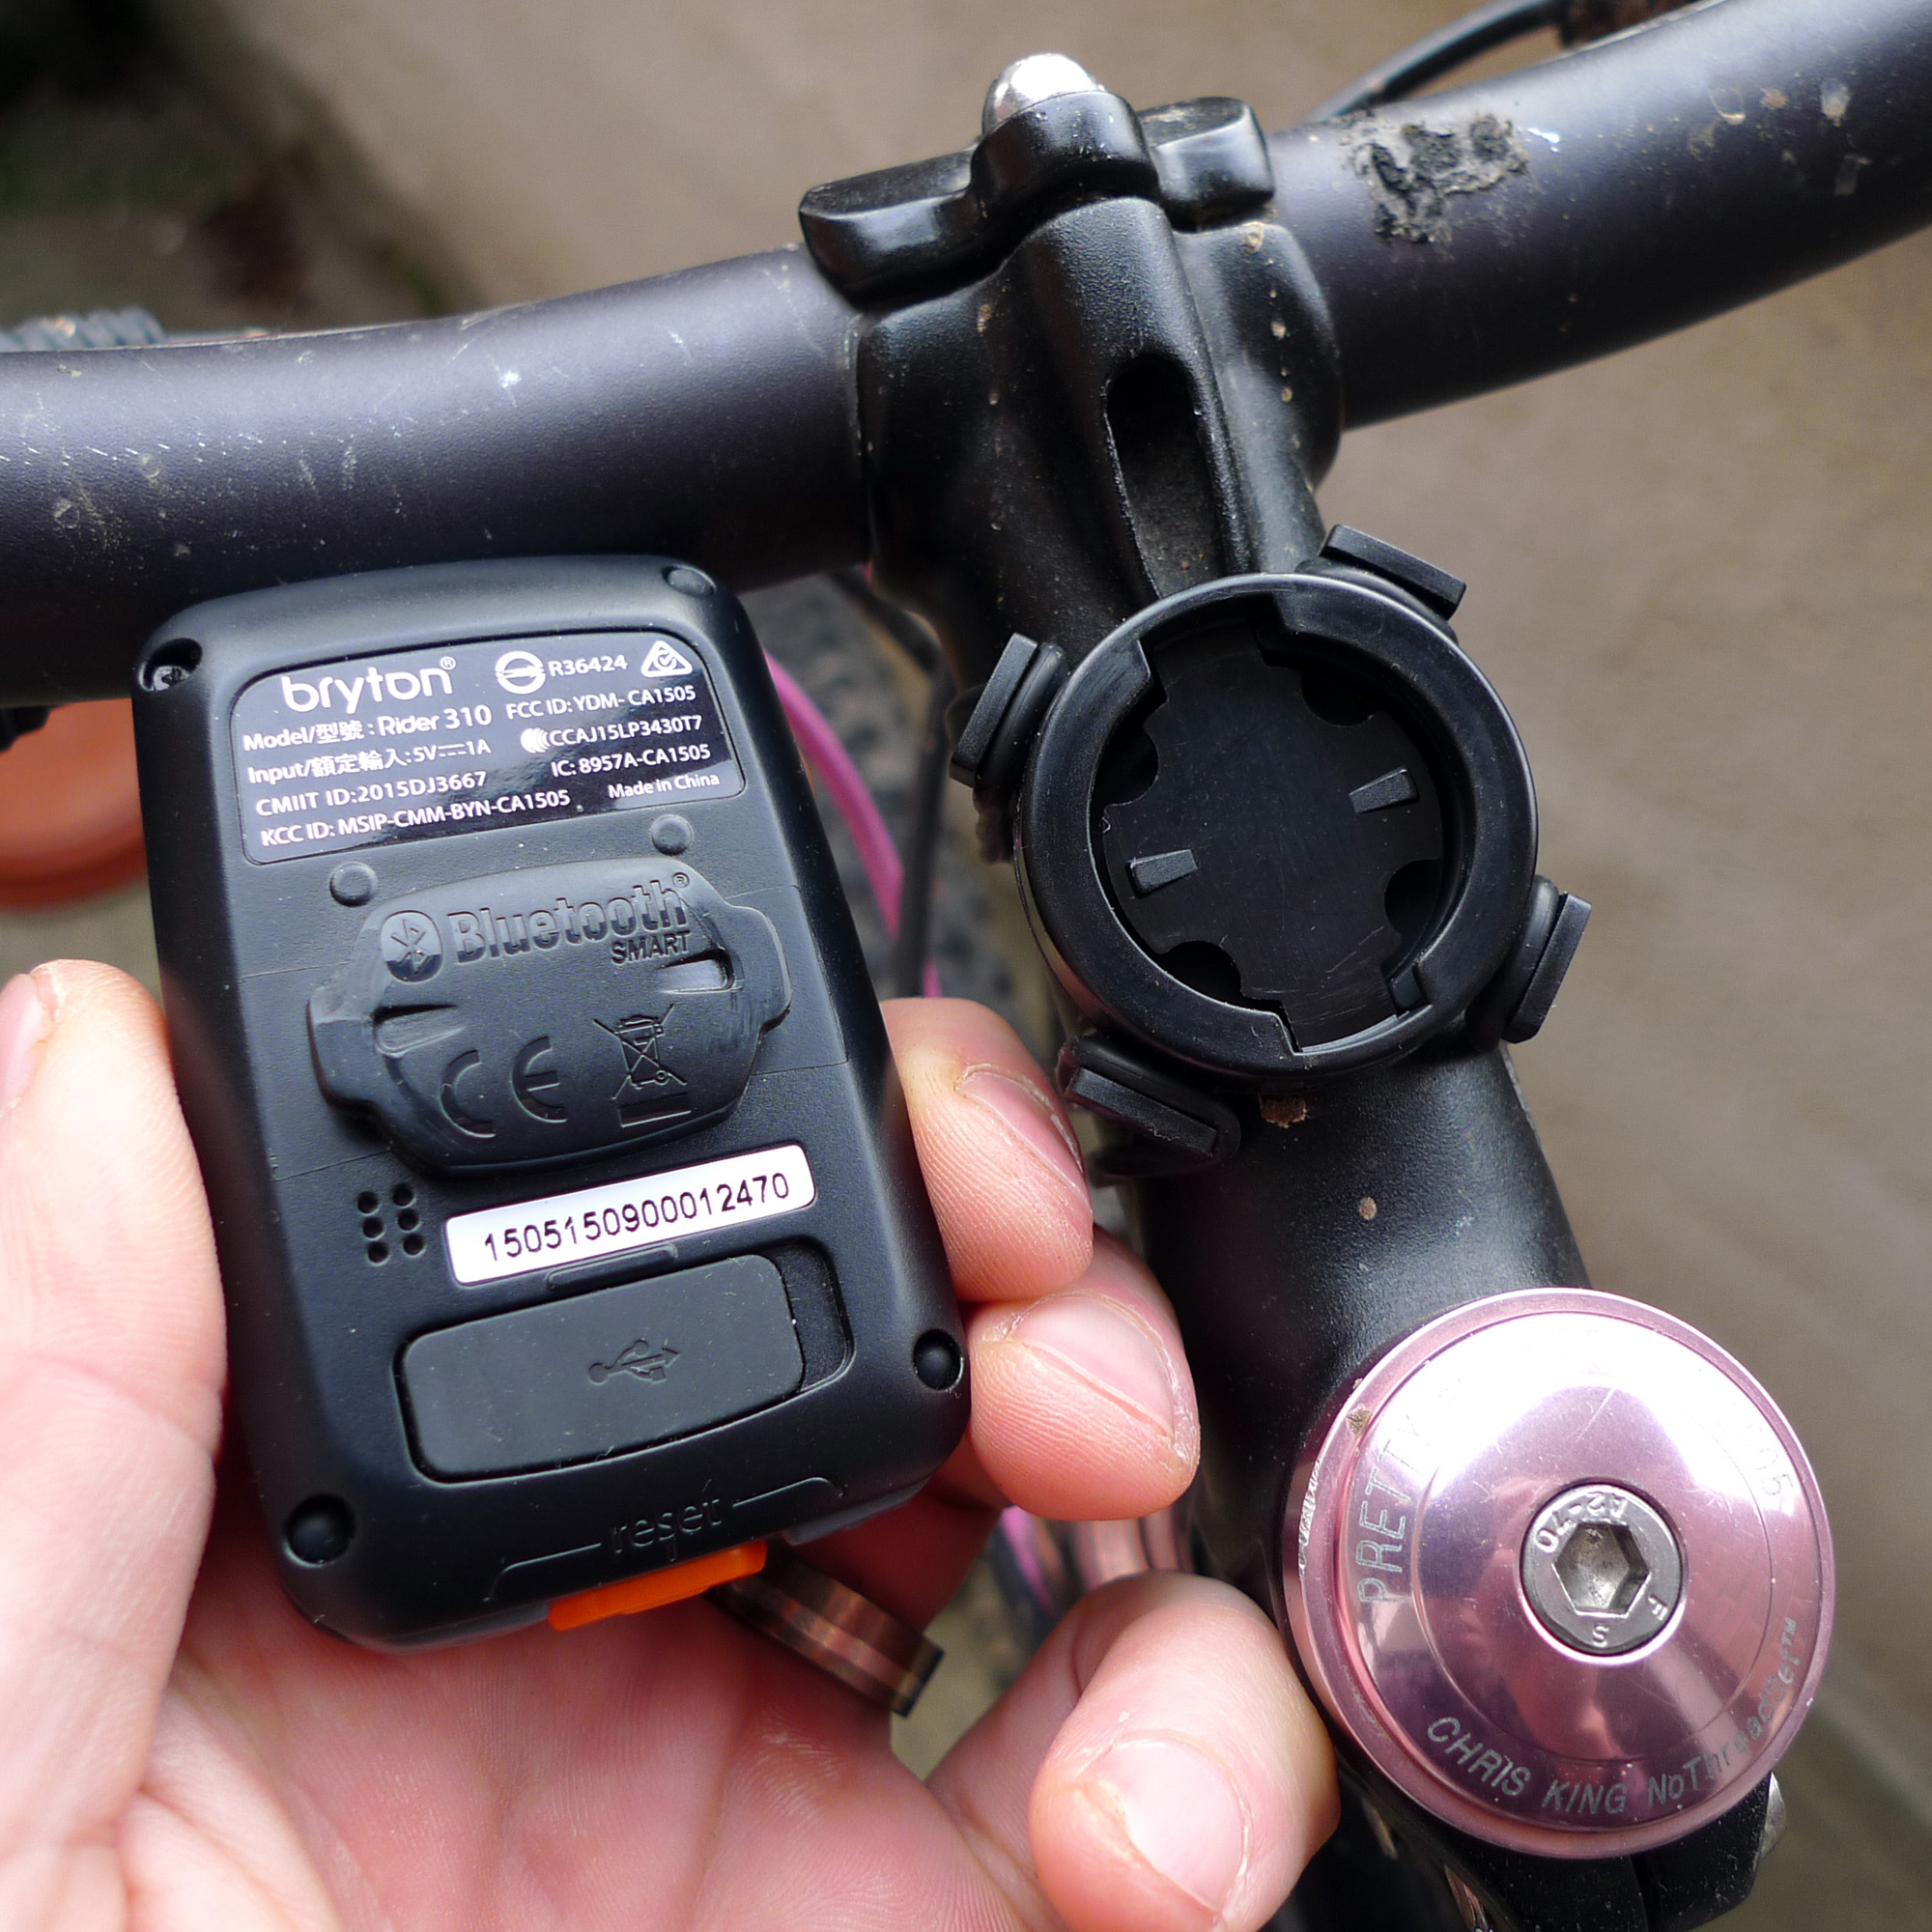 Review: Bryton Rider 310 affordable GPS tracking cycle computer 